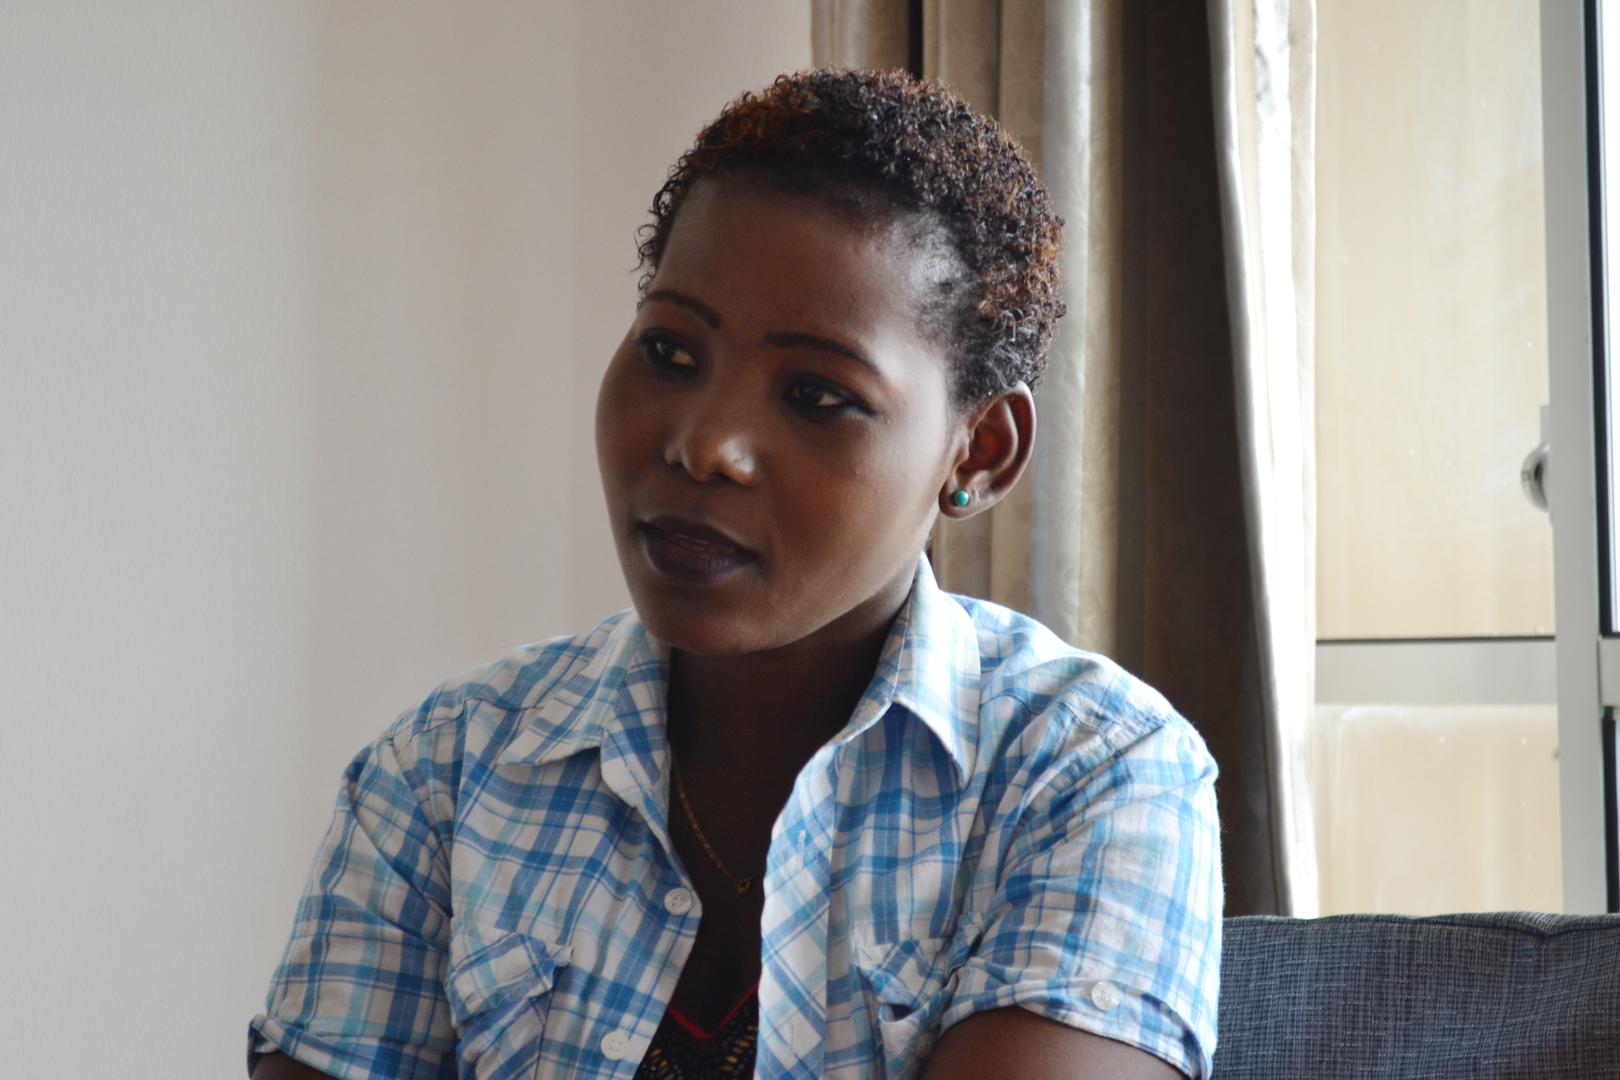 Asma, 24, said that following months of isolation and abuse while working as a domestic worker in Oman: “I felt mentally unstable.” She said it took another three months to recover after she returned to Tanzania. Dar es Salaam, Tanzania. 